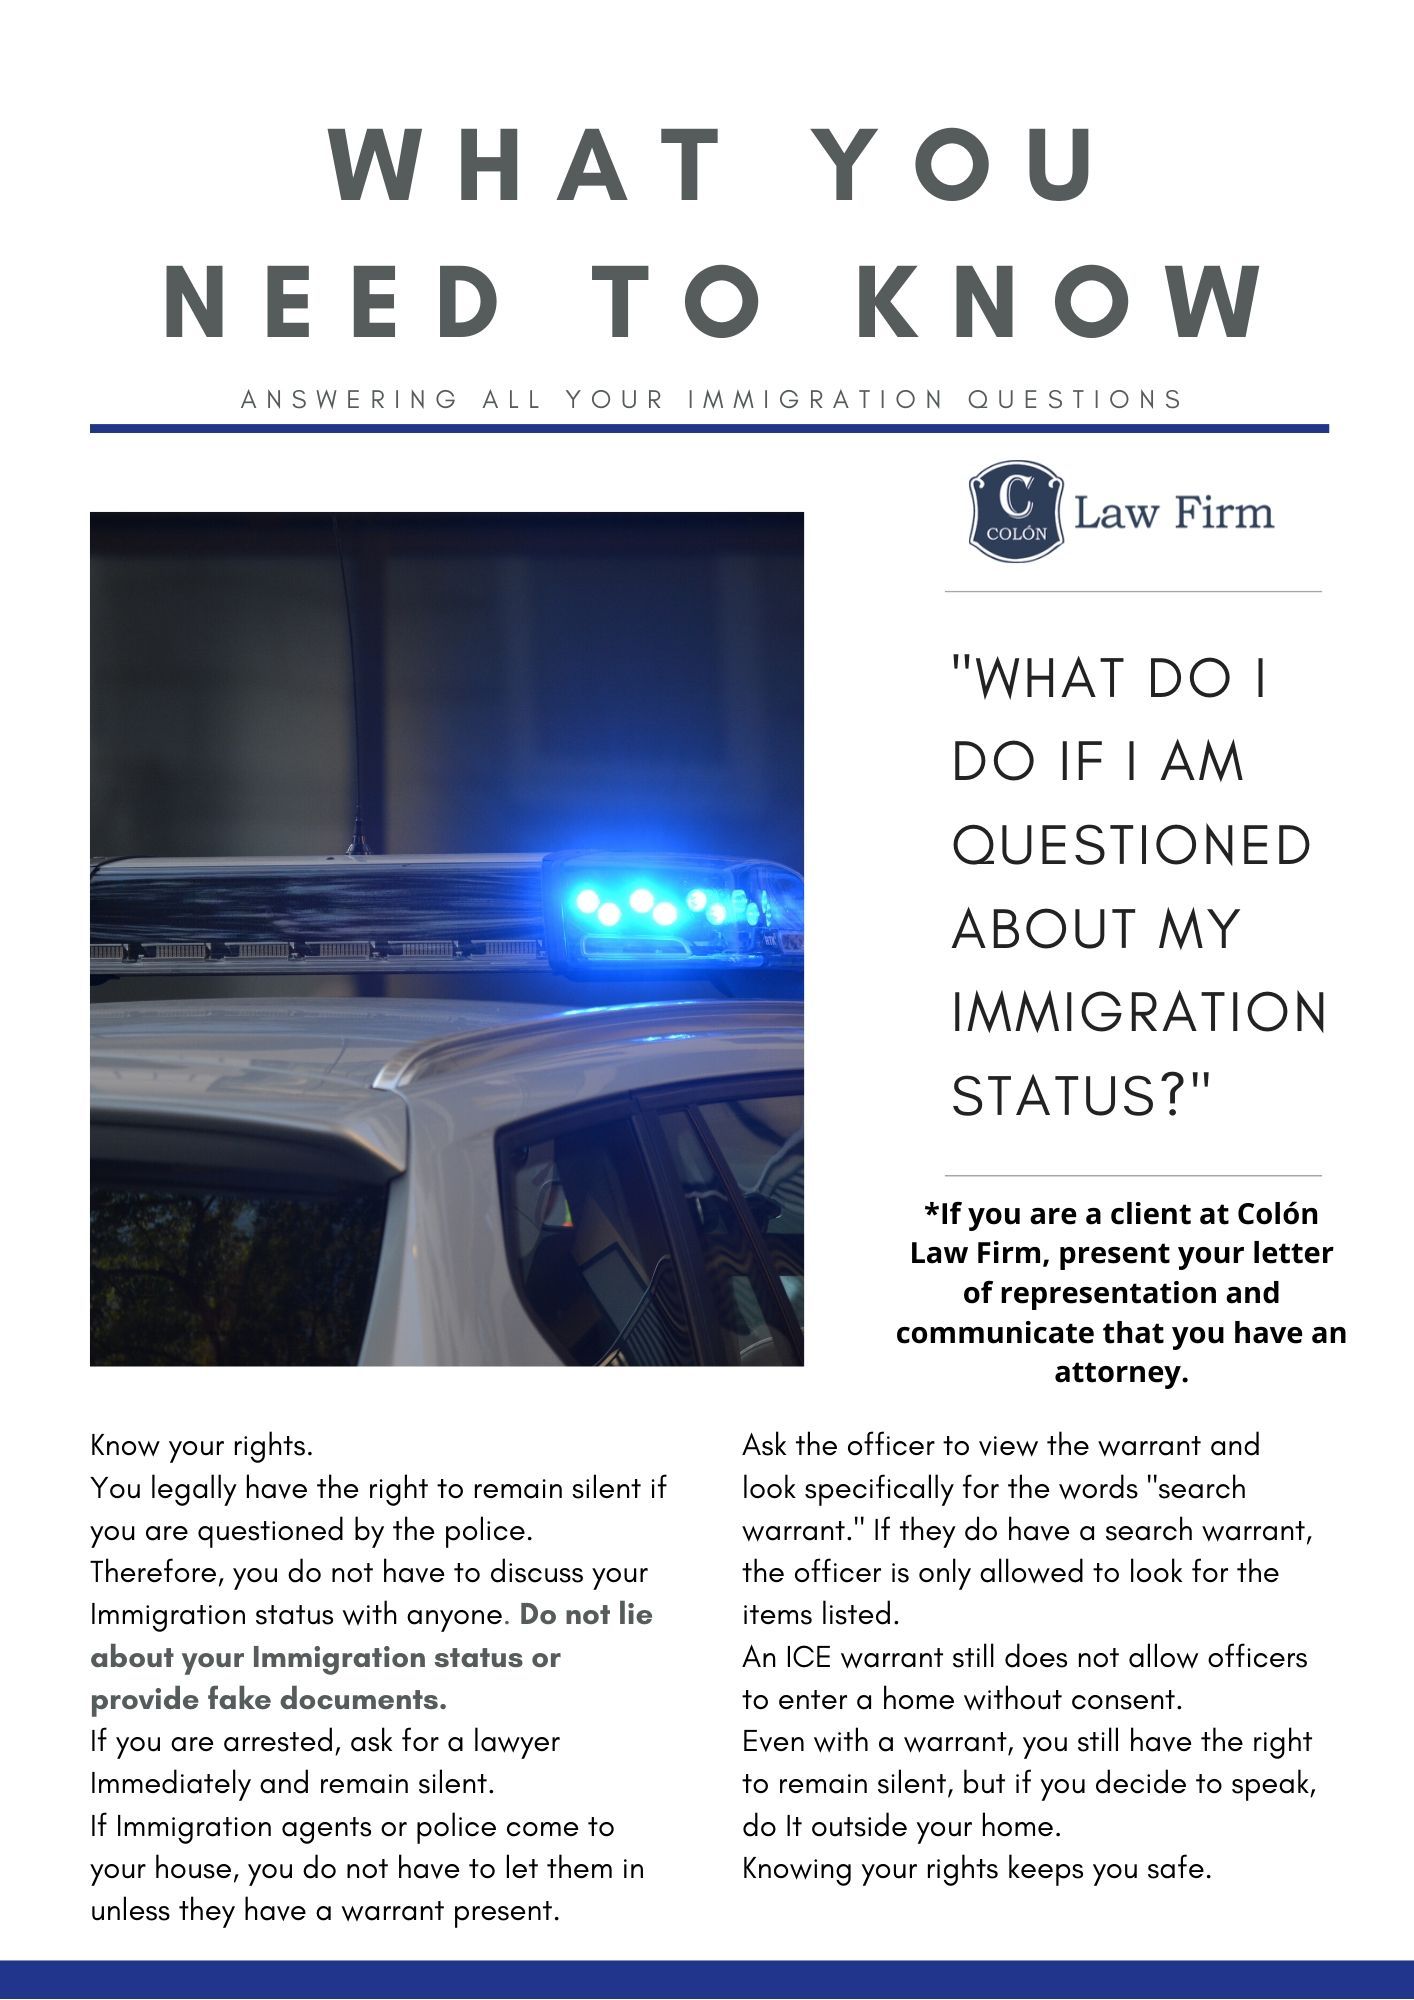 Colon Law Firm Newsletter: What You Need to Know When Questioned About My Immigration Status